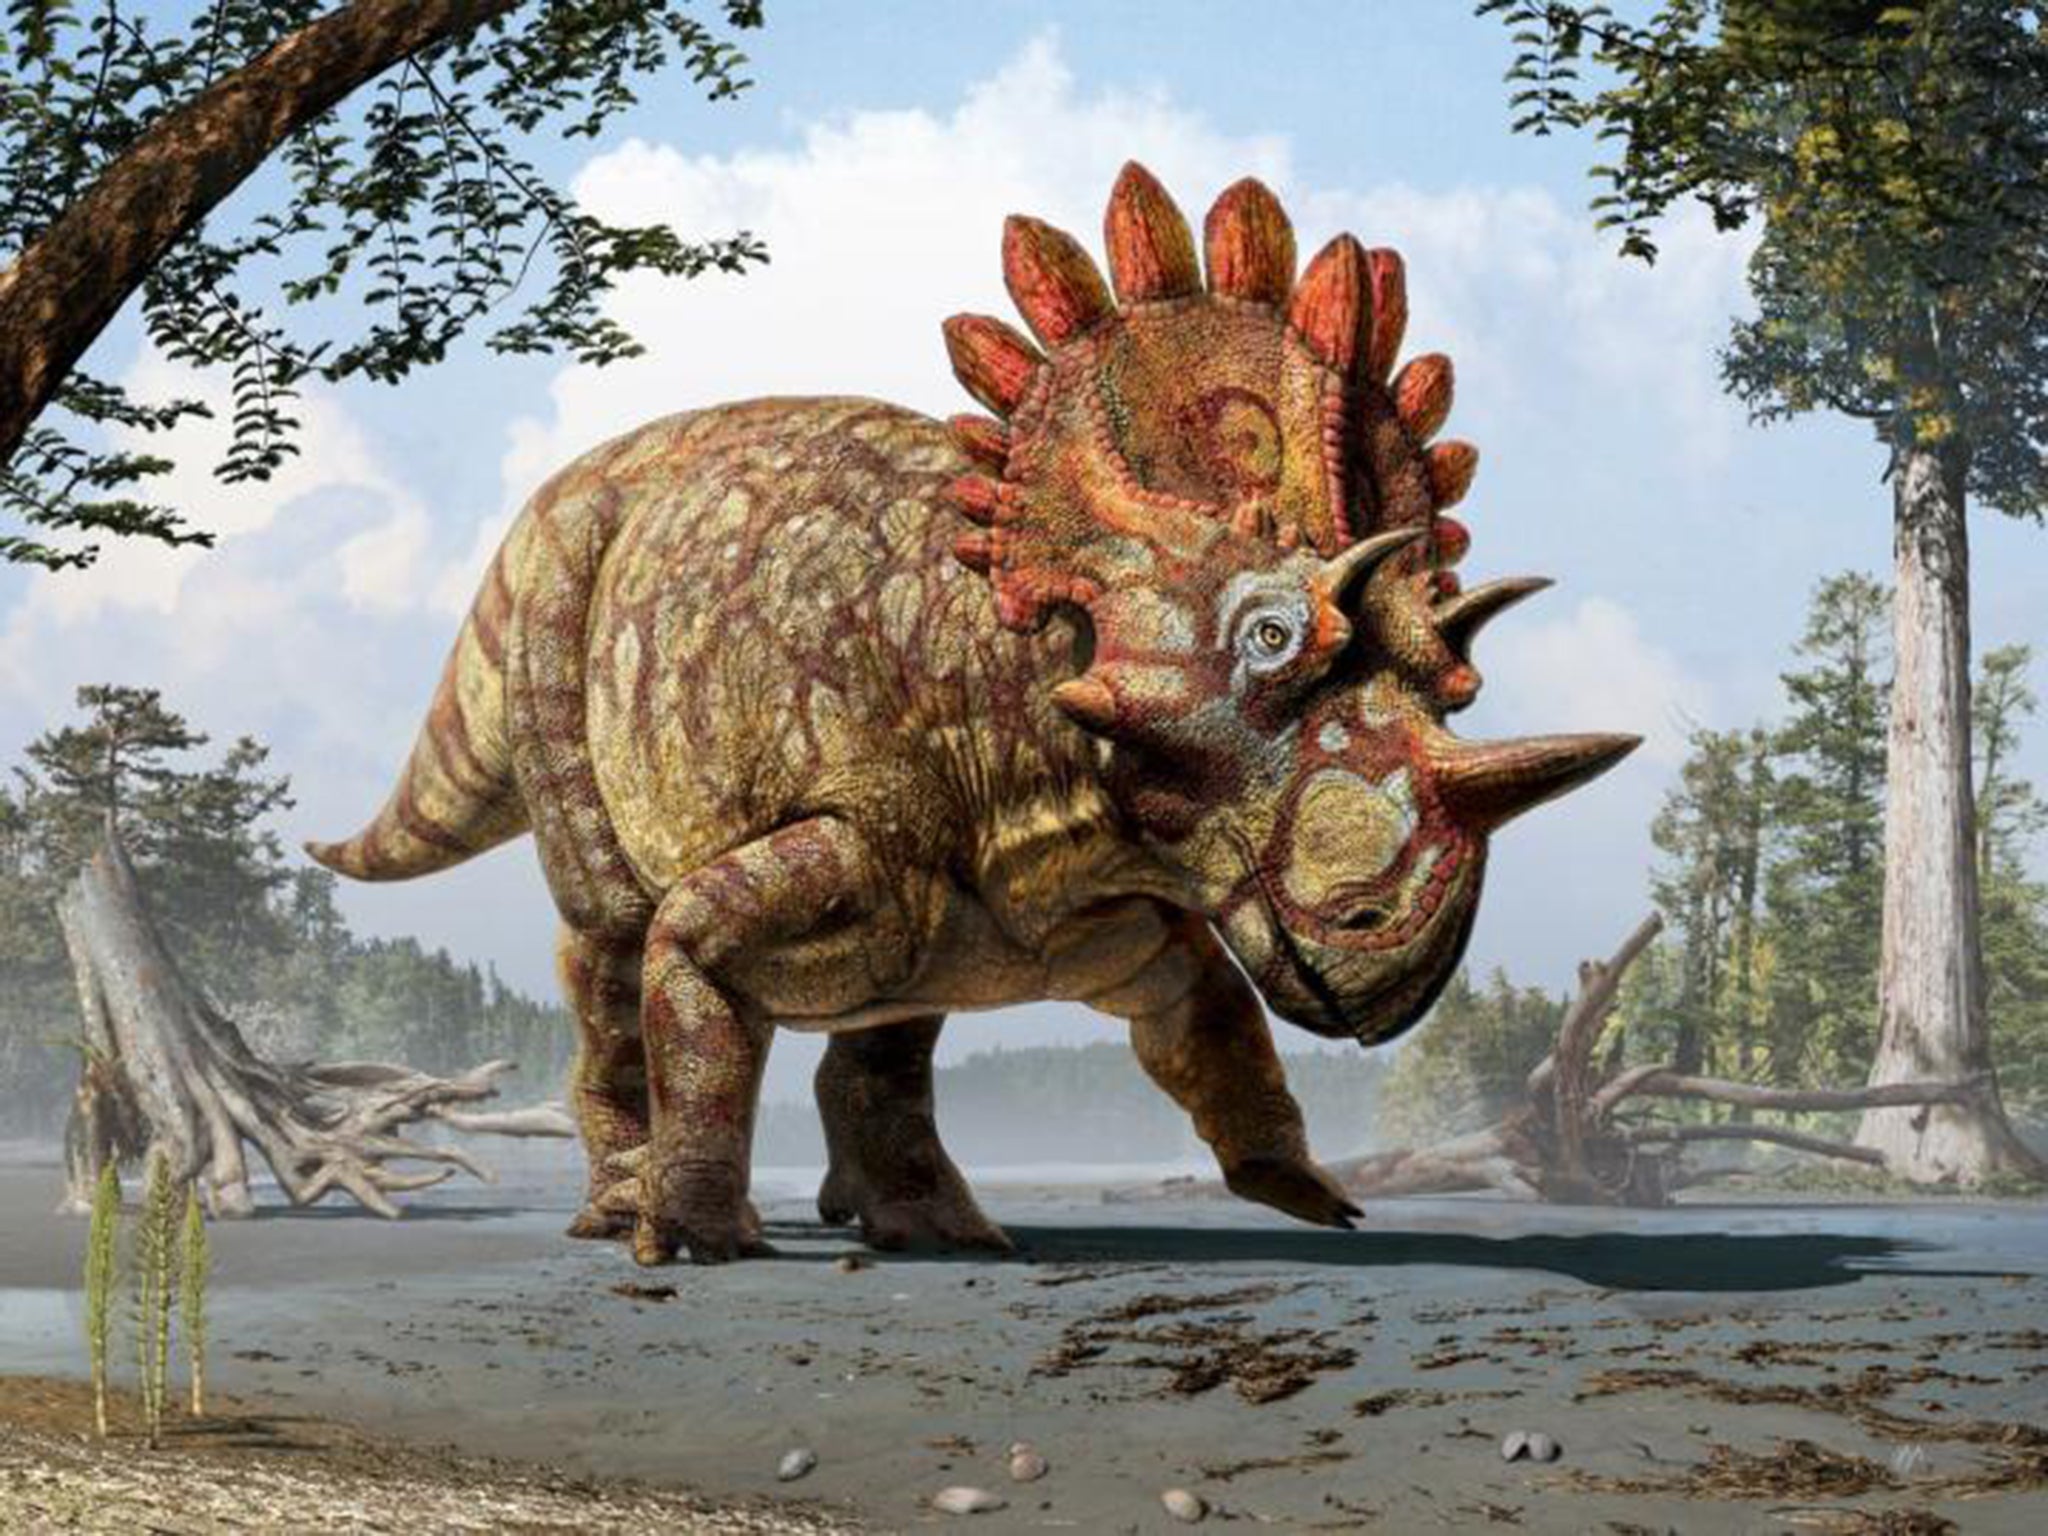 The newly discovered dinosaur has been called Hellboy